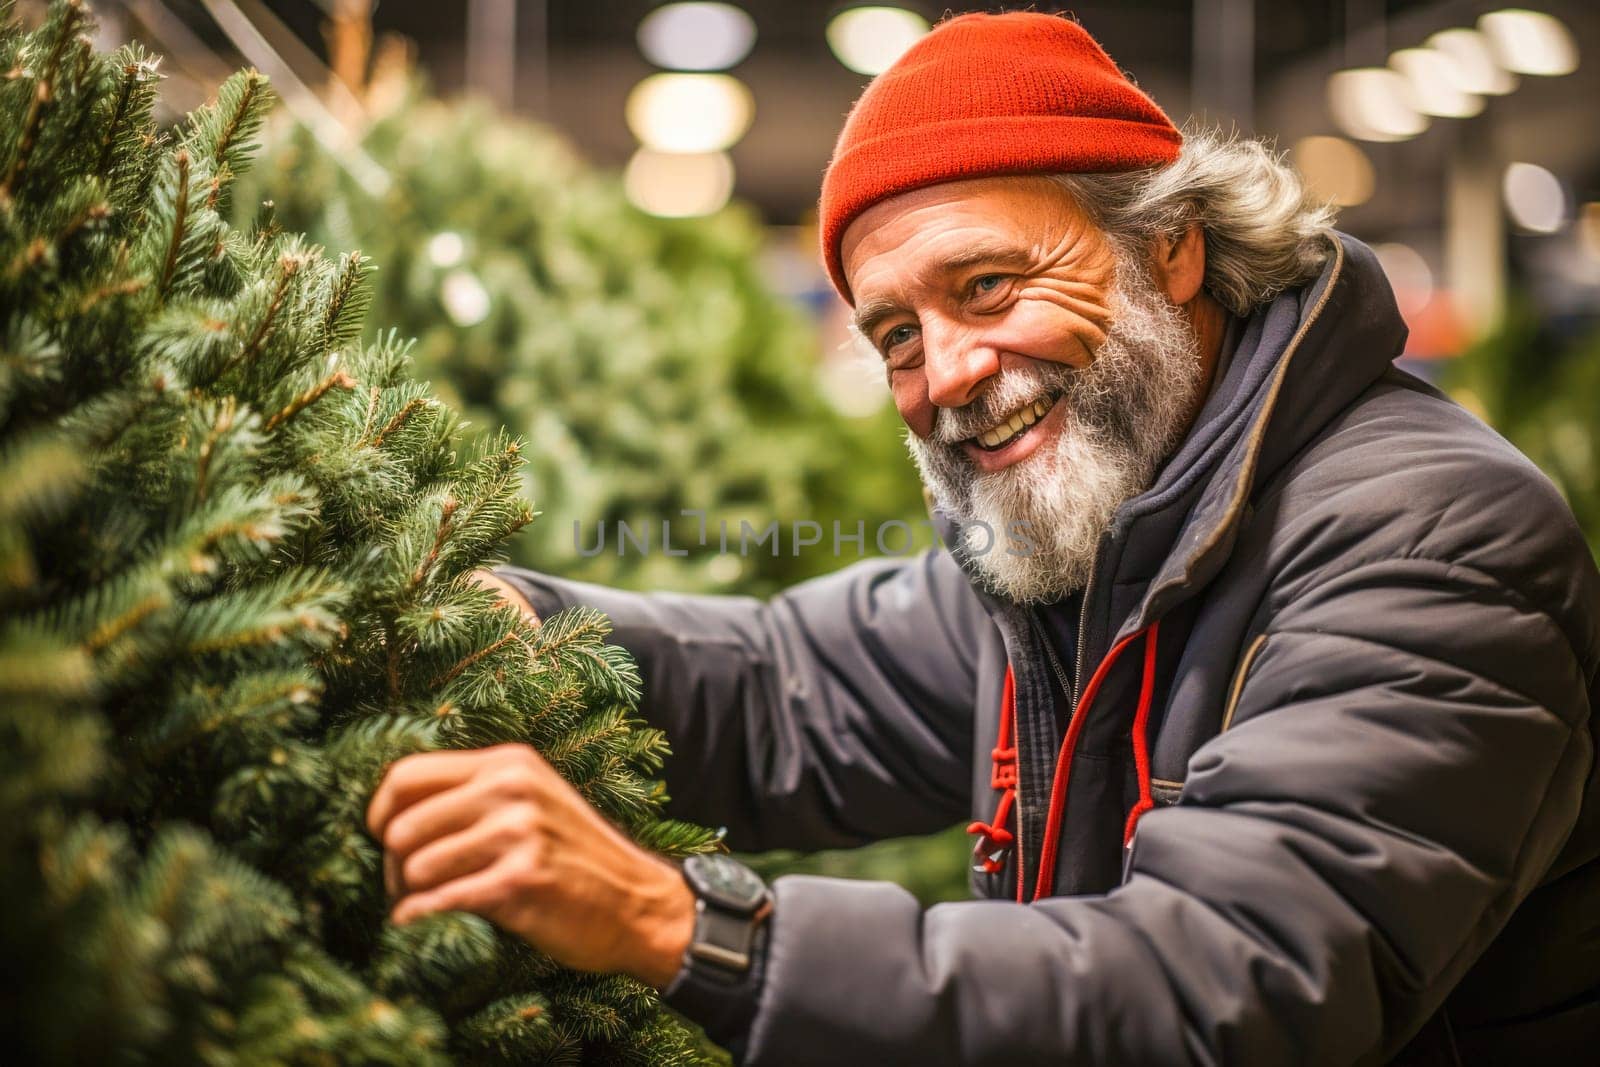 A man buys a Christmas tree at the market by Yurich32